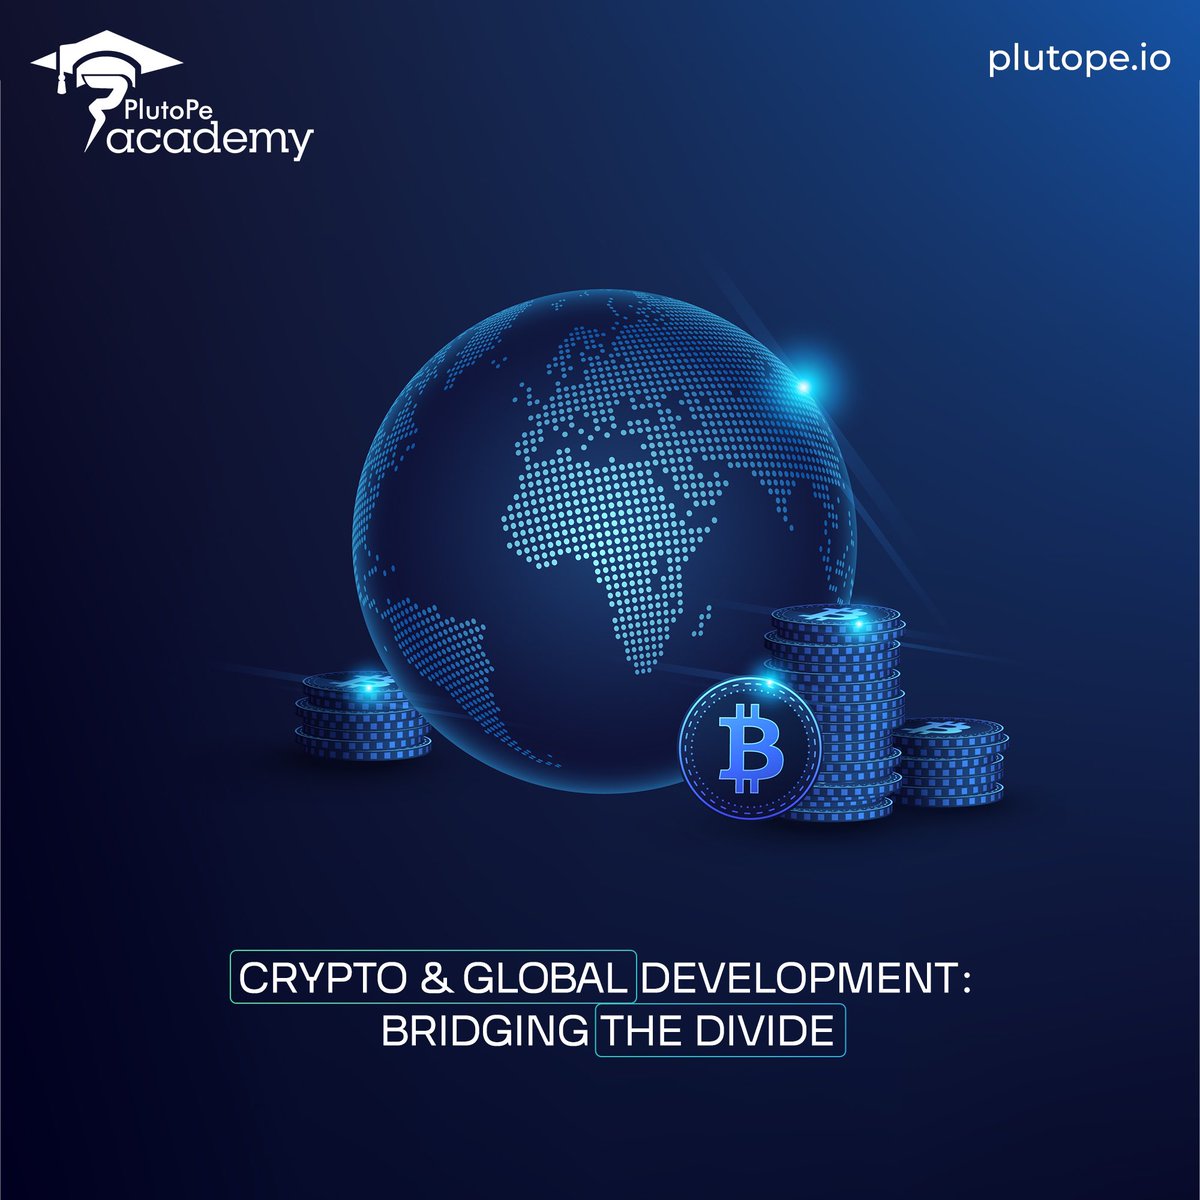 Magic Money & A Fairer World? Let's Talk! Remember GPay & Paytm making payments easier? 😶‍🌫️ Now imagine 'magic internet money' helping people globally! That's Crypto & Development: 🤔Think: Some have cool tools like GPay, others don't. Not fair! ❌ #Crypto could be a tool for